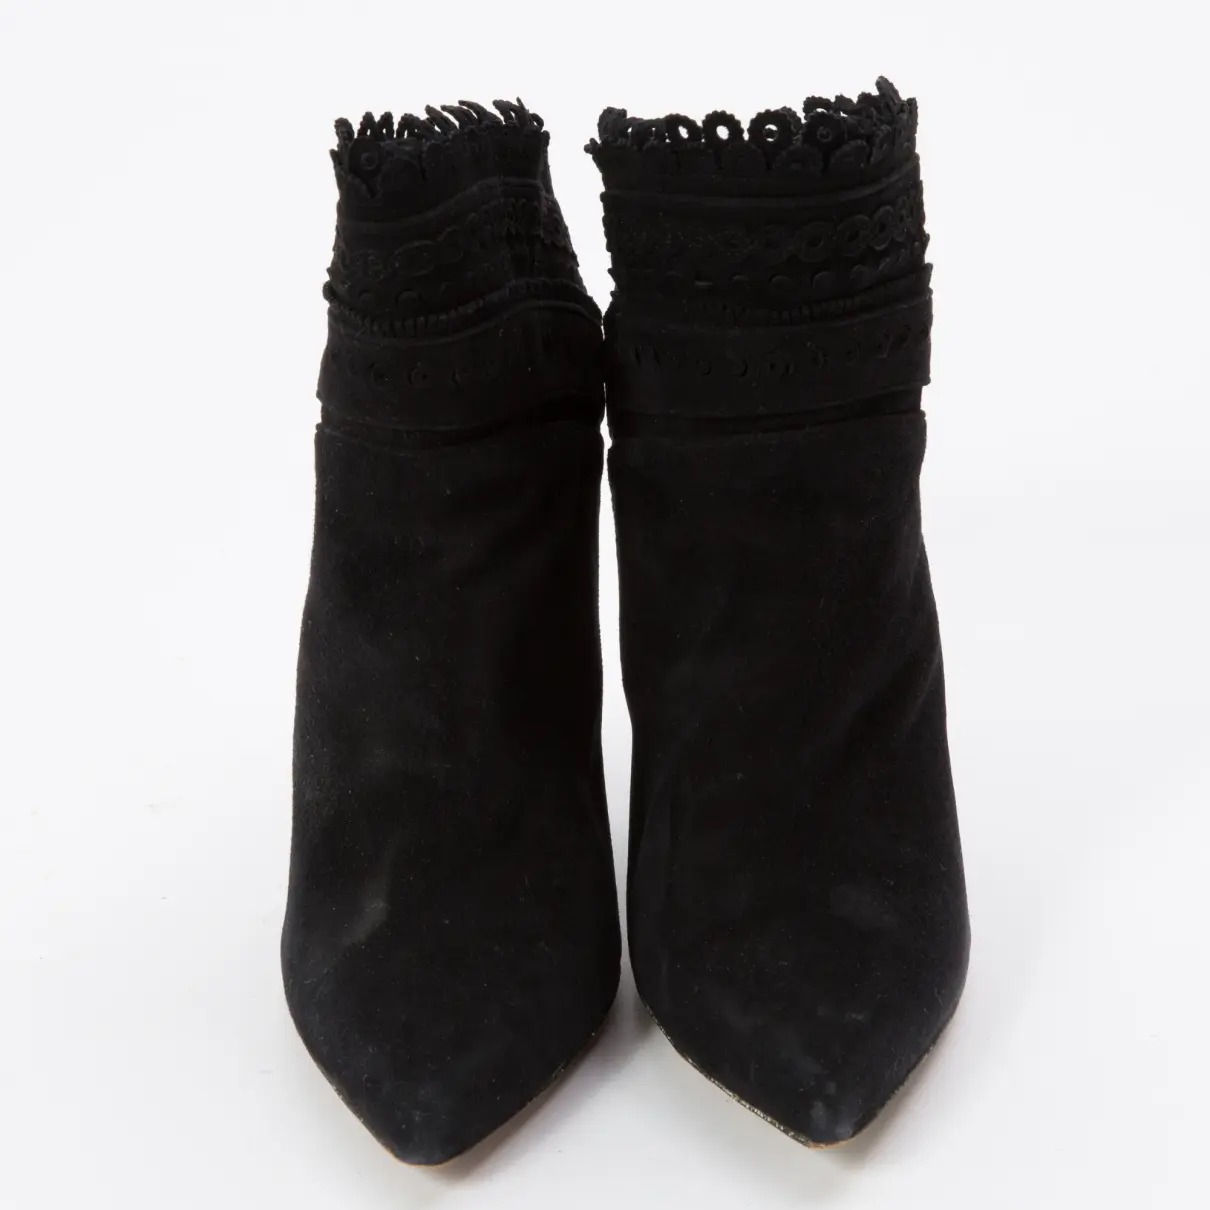 Buy Tabitha Simmons Boots online